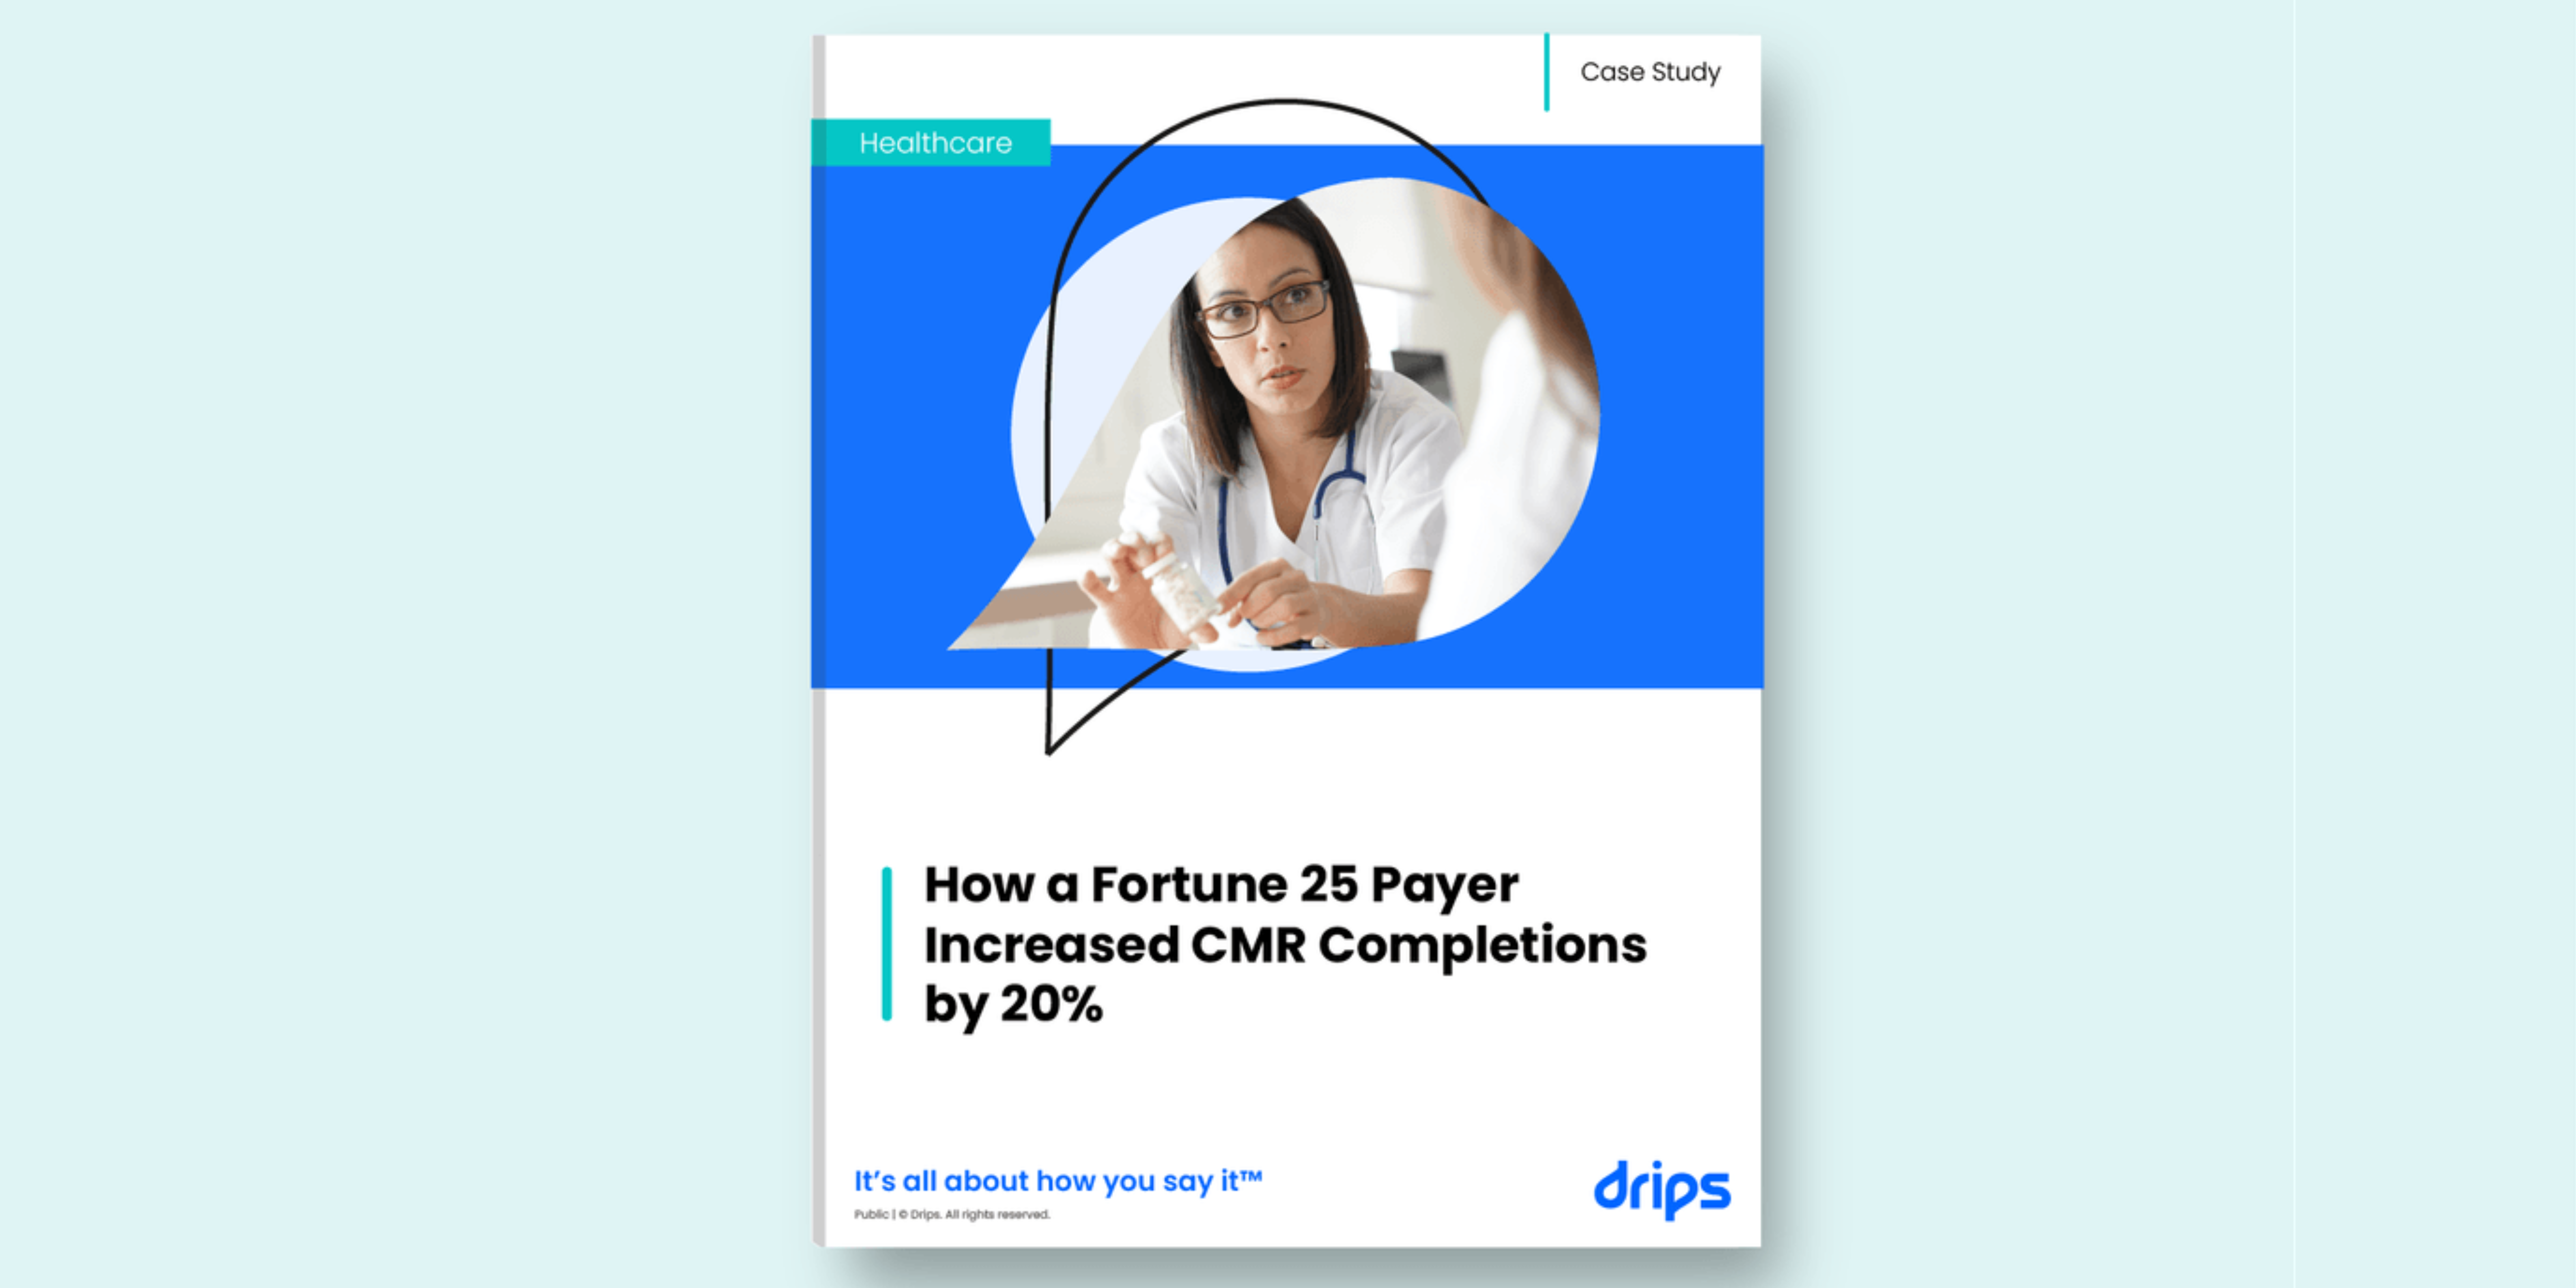 How A Fortune 25 Payer Increased CMR Completions with Drips